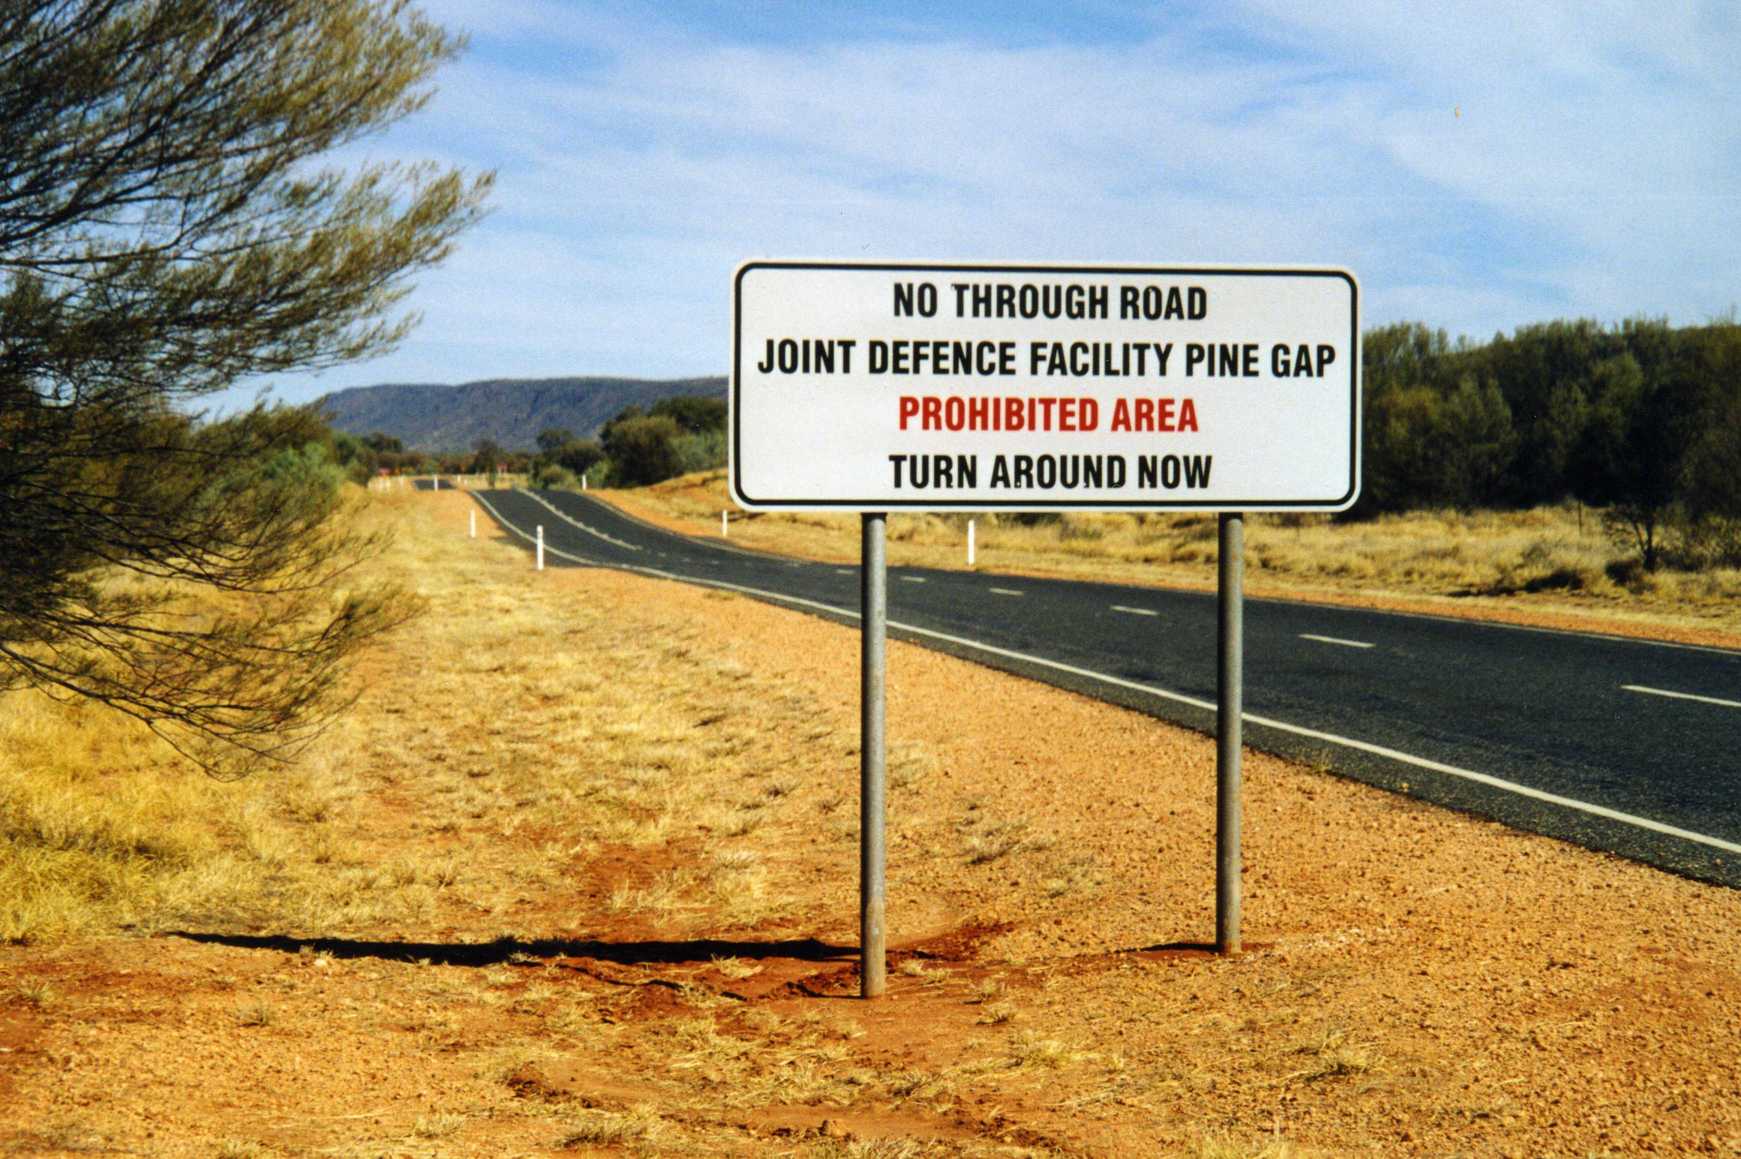 Over 1000 CIA agents have turned up at Pine Gap